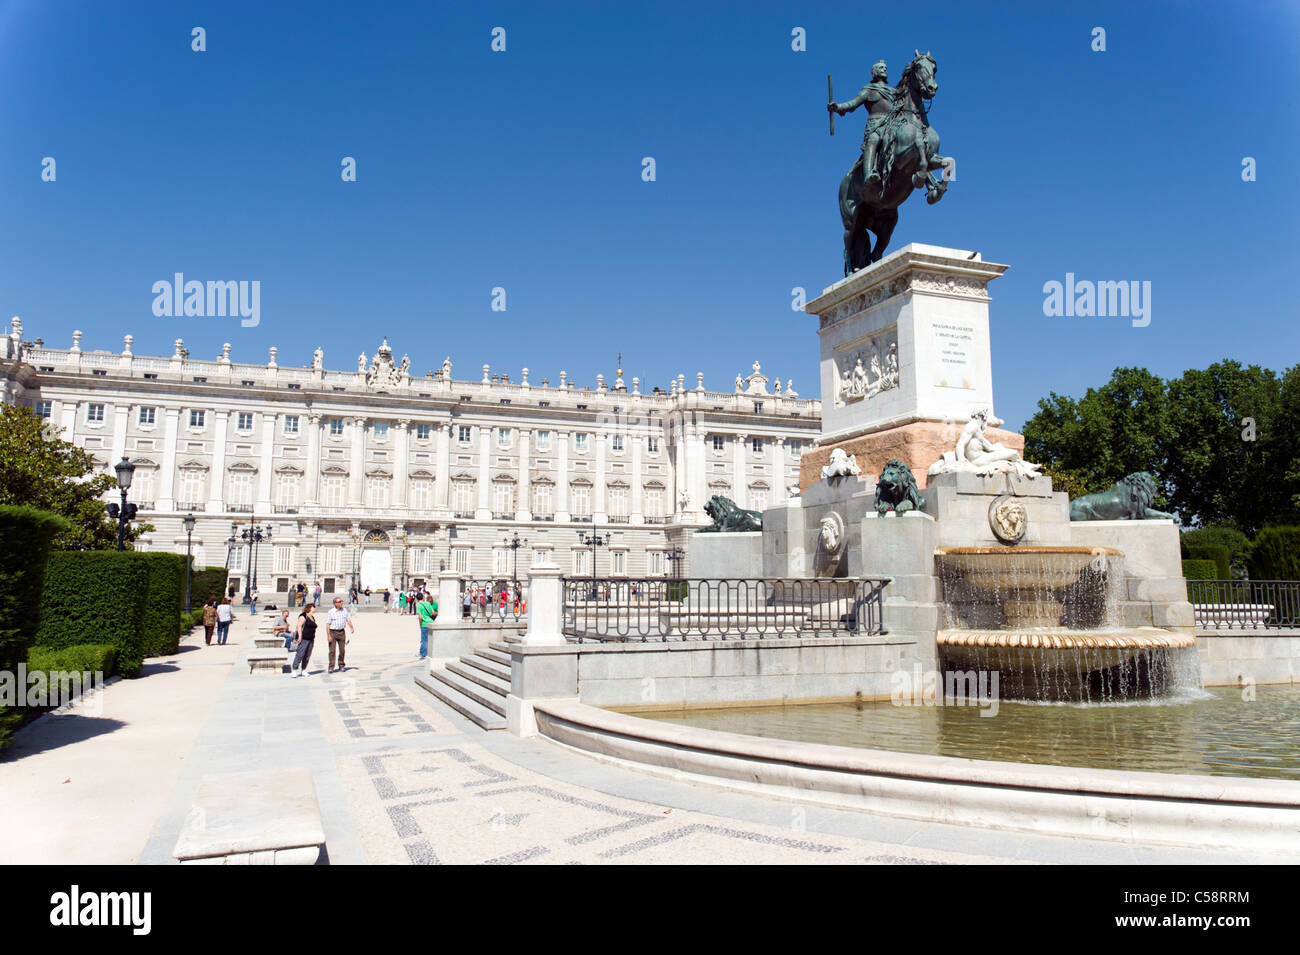 Equestrian statue of Philip IV on the Plaza de Oriente in front of the Palacio Real de Madrid, Madrid, Spain Stock Photo